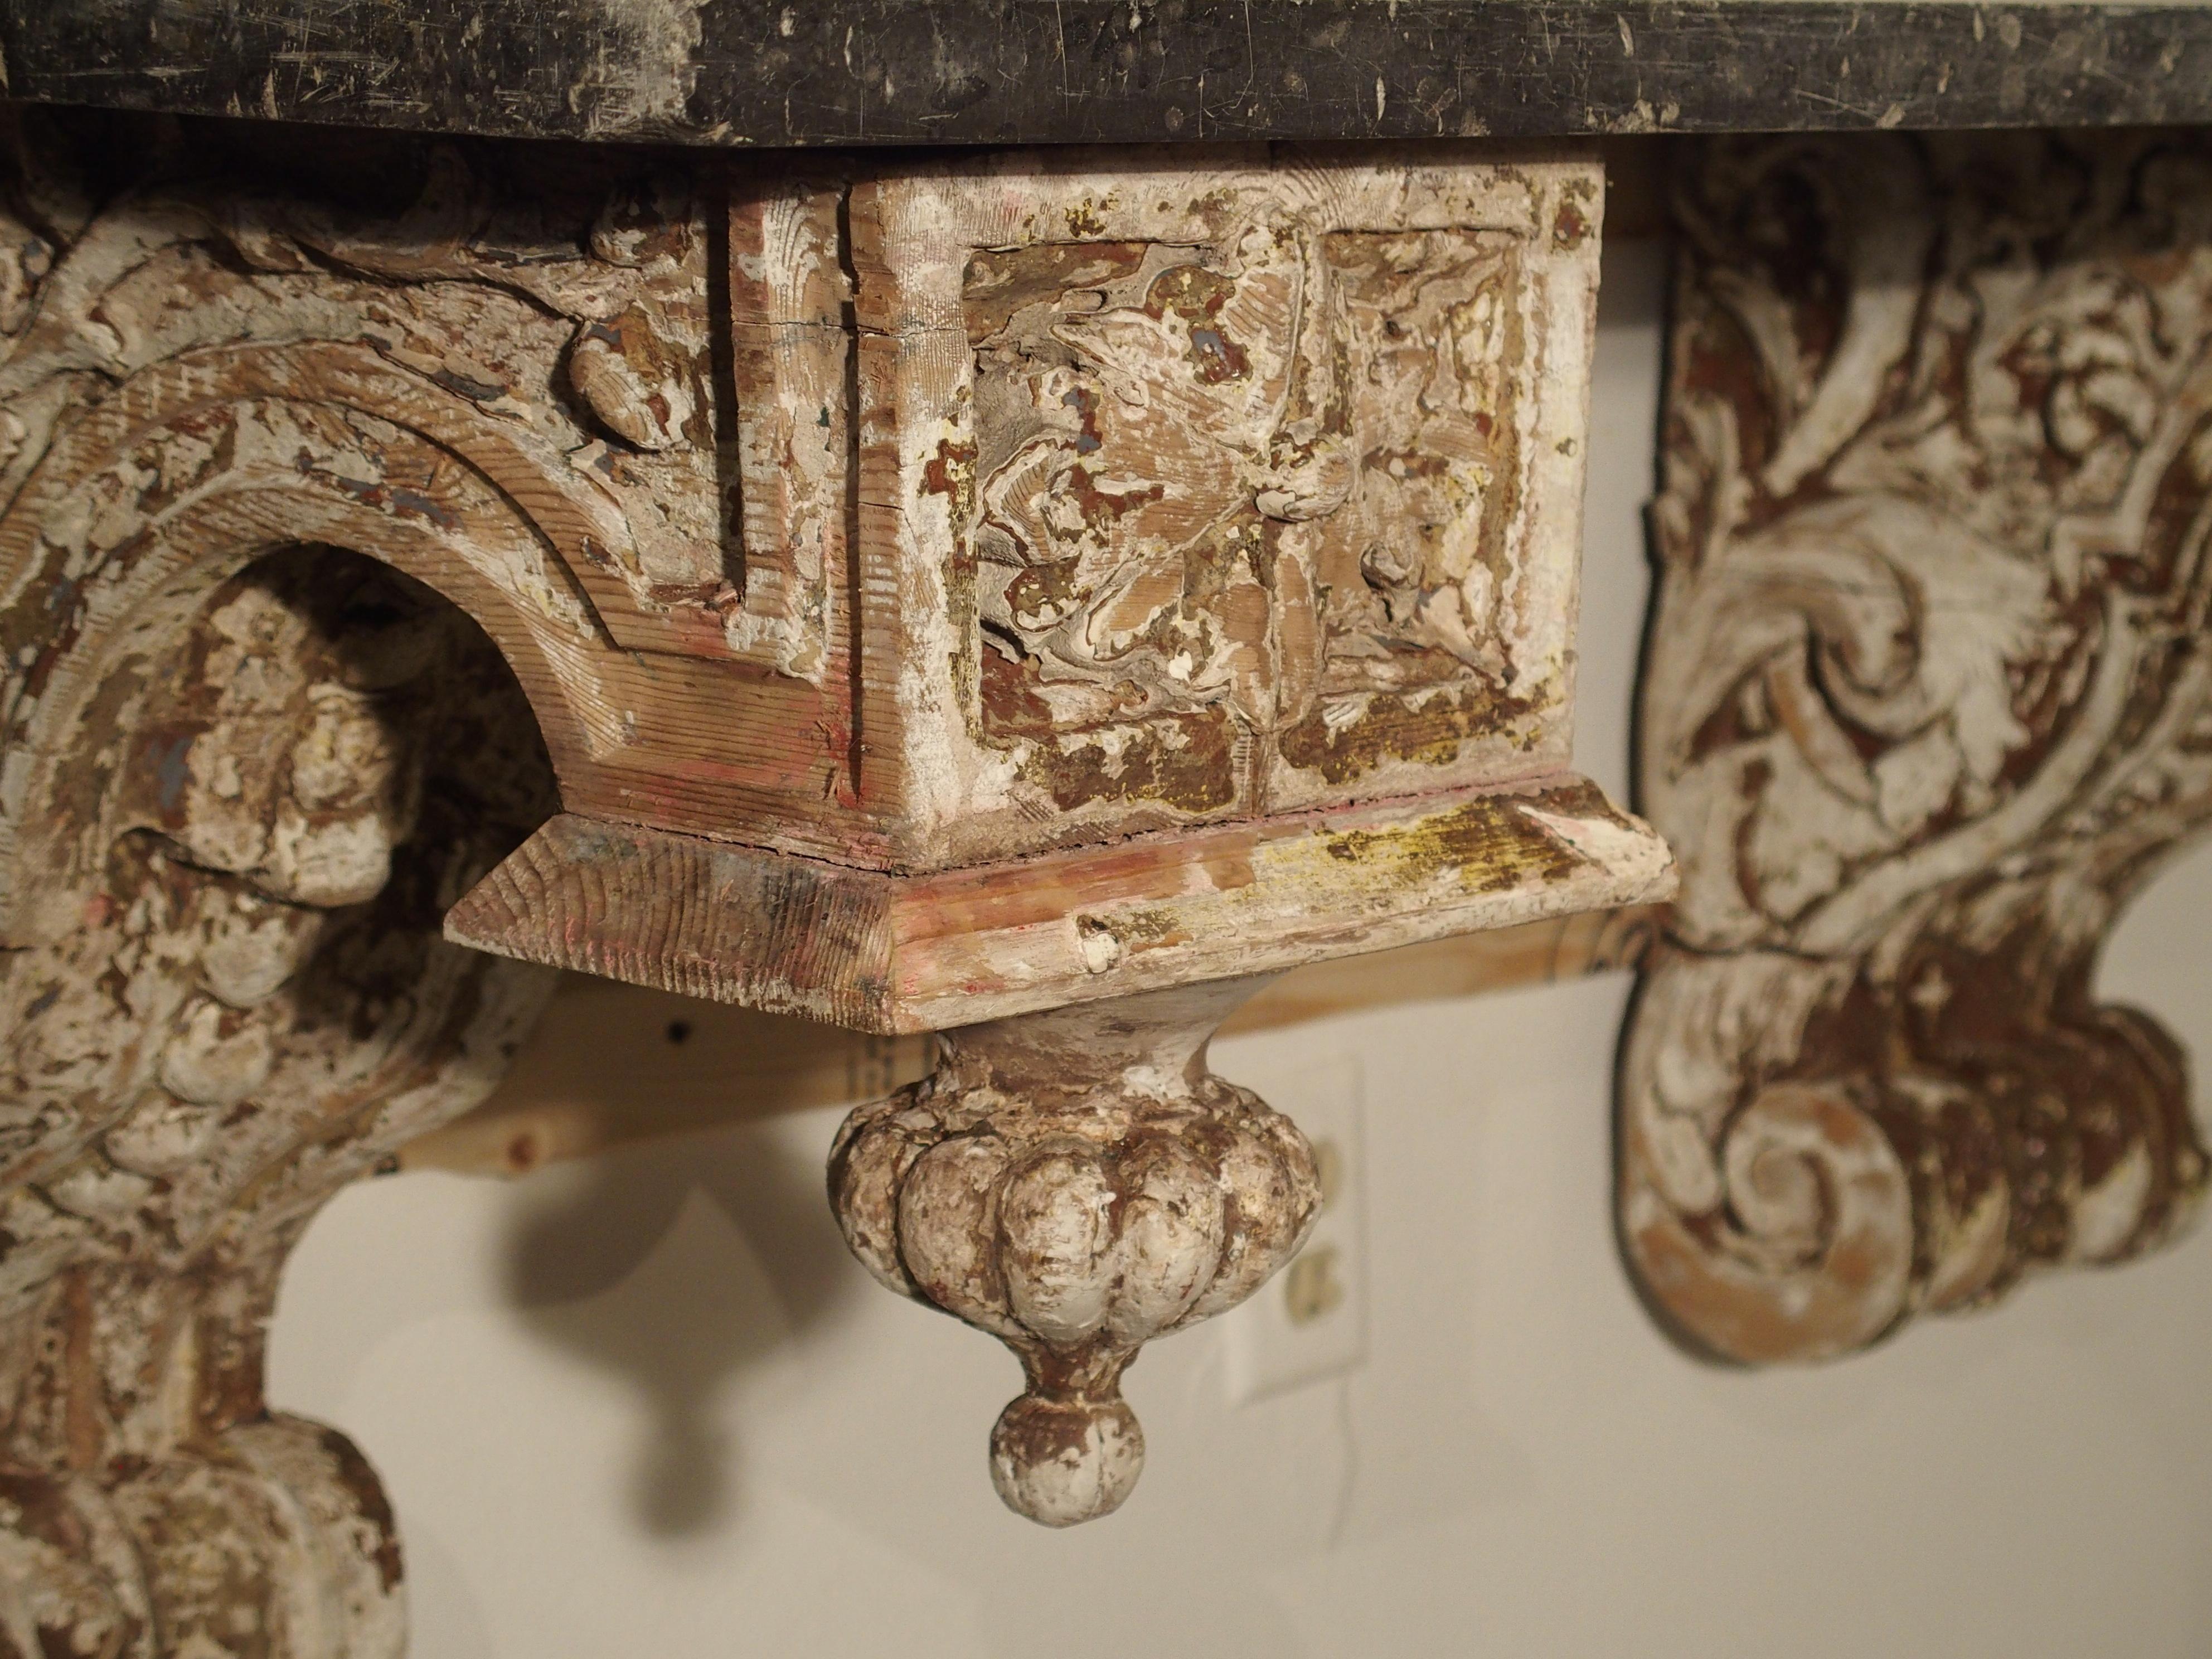 From France, this console table is comprised of two beautiful parcel painted 19th century brackets, and a rectangular black marble top. Each bracket is deeply carved with motifs of floral and foliate design. C and S-scrolls form the shapes of both.